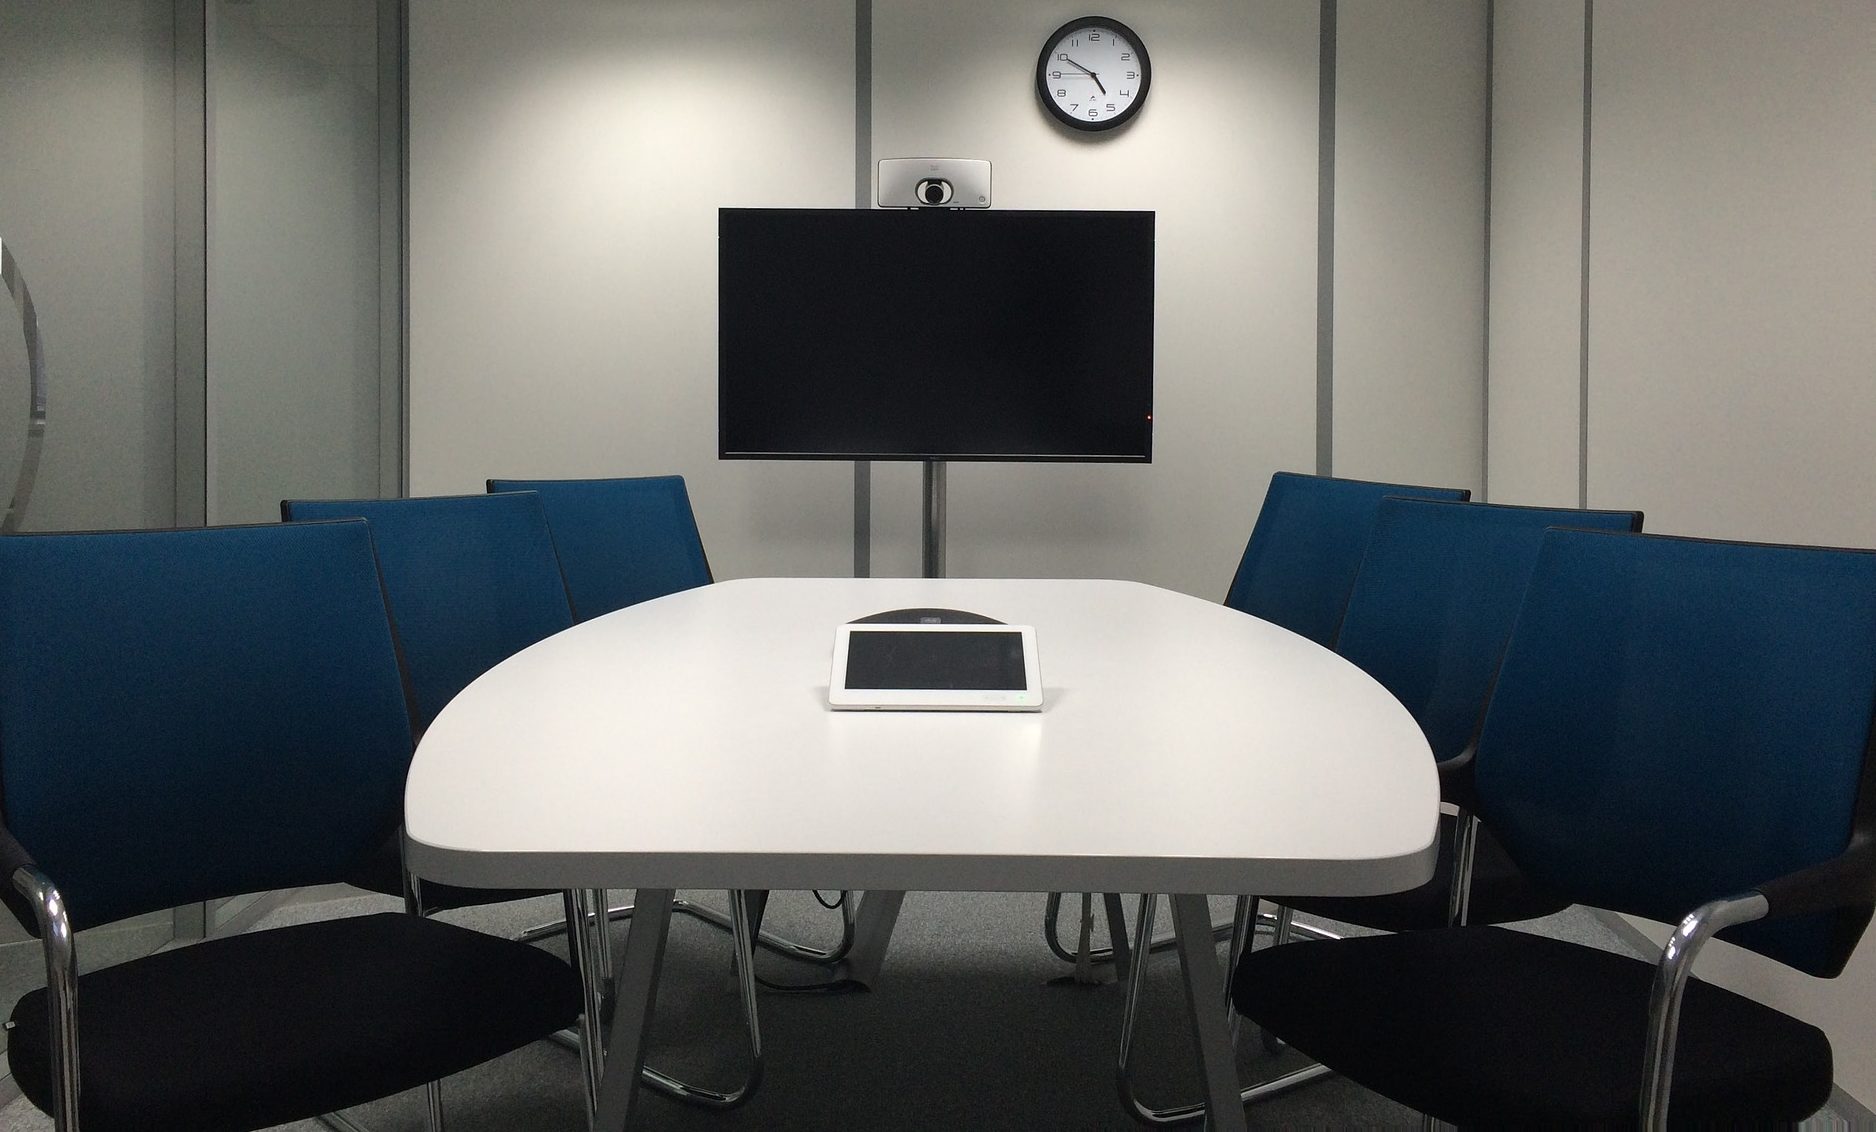 Photograph of a conference room. There is a table and several empty chairs in front of a TV. There is a microphone/speaker combination on the table.